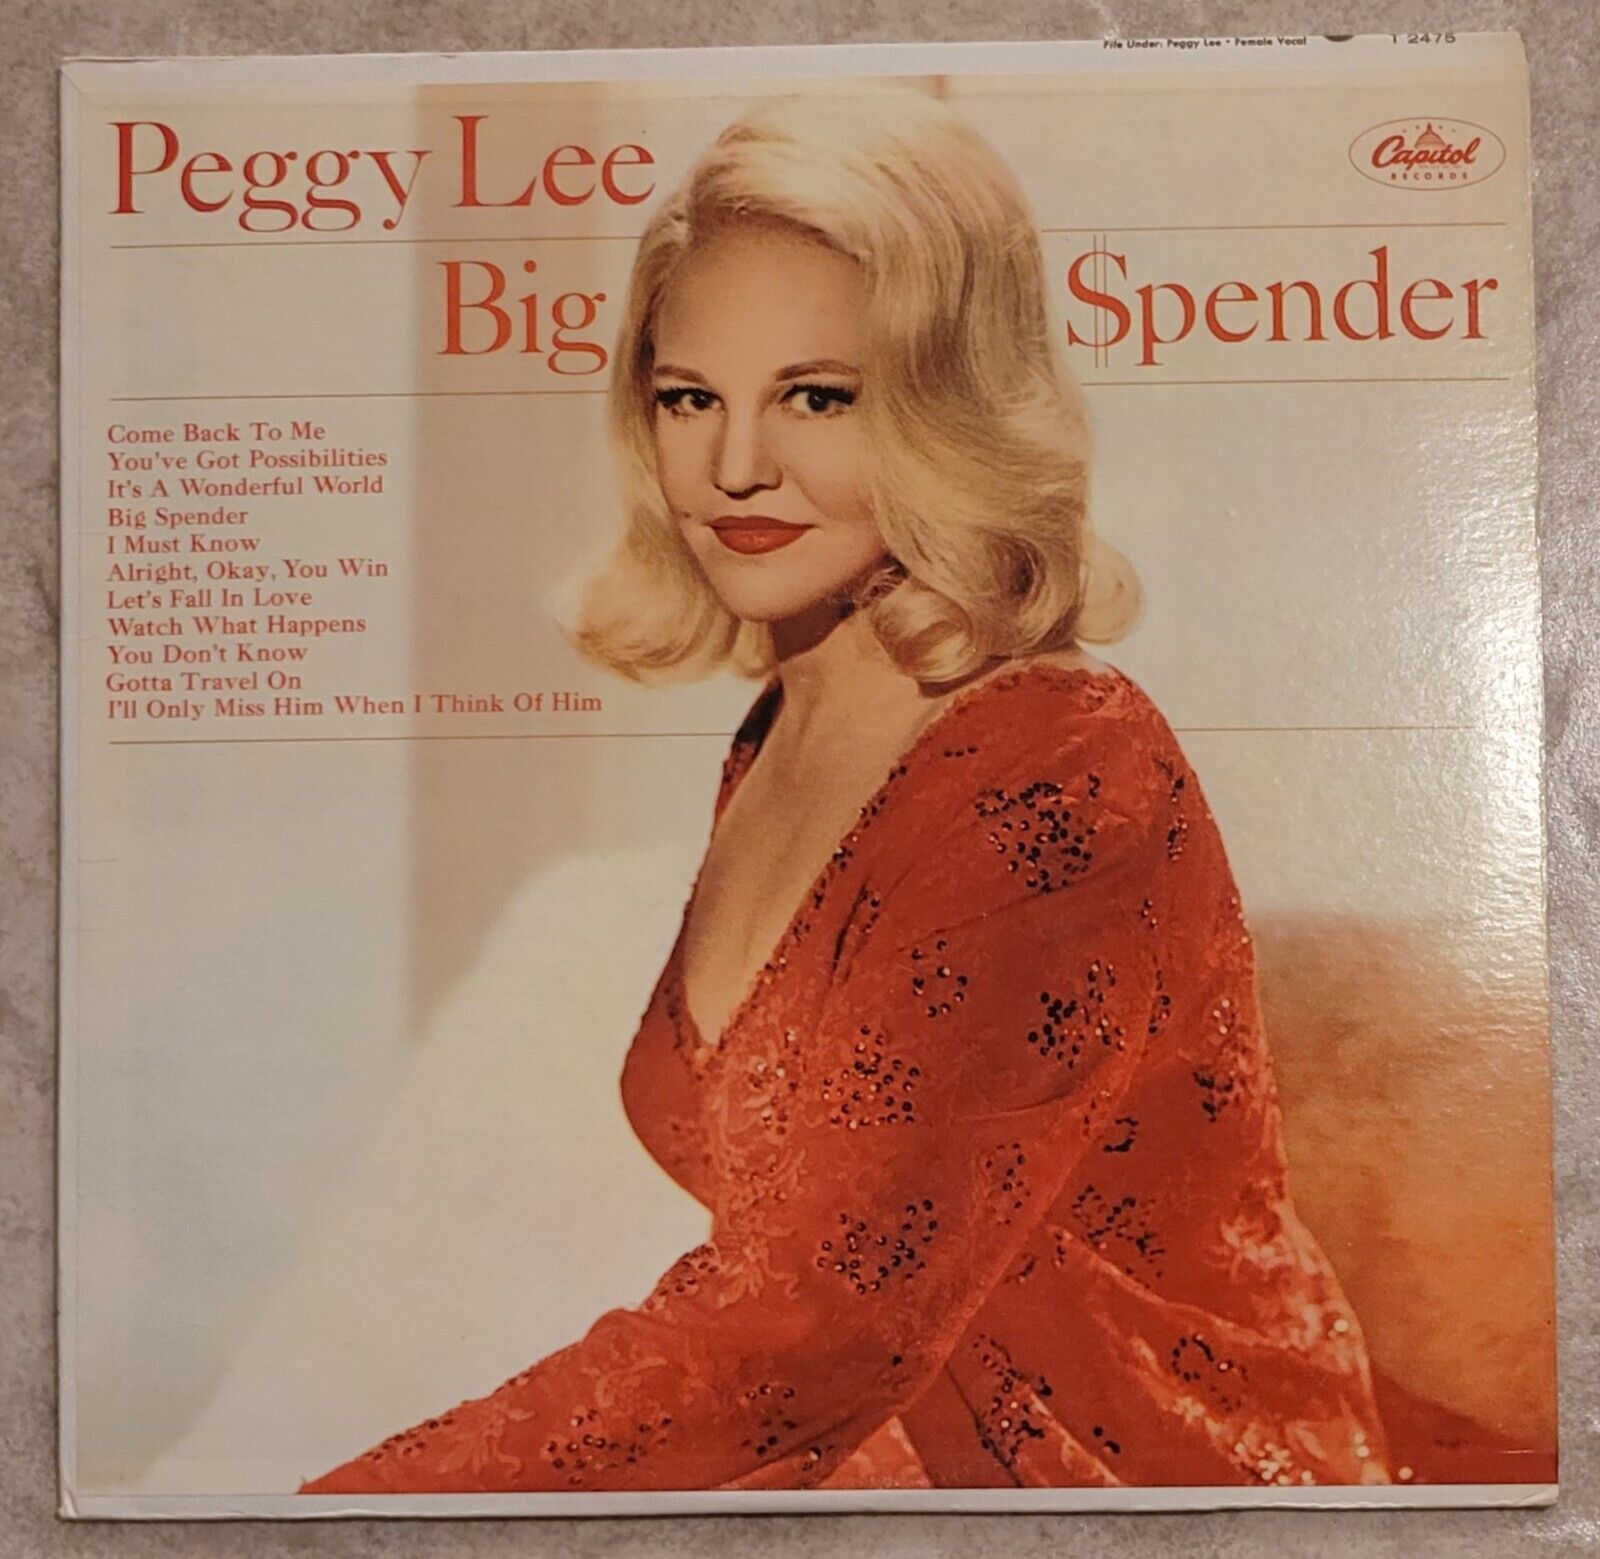 VINTAGE VINYL RECORD PEGGY LEE BIG $ SPENDER CAPITOL RECORDS CHEESECAKE COVER